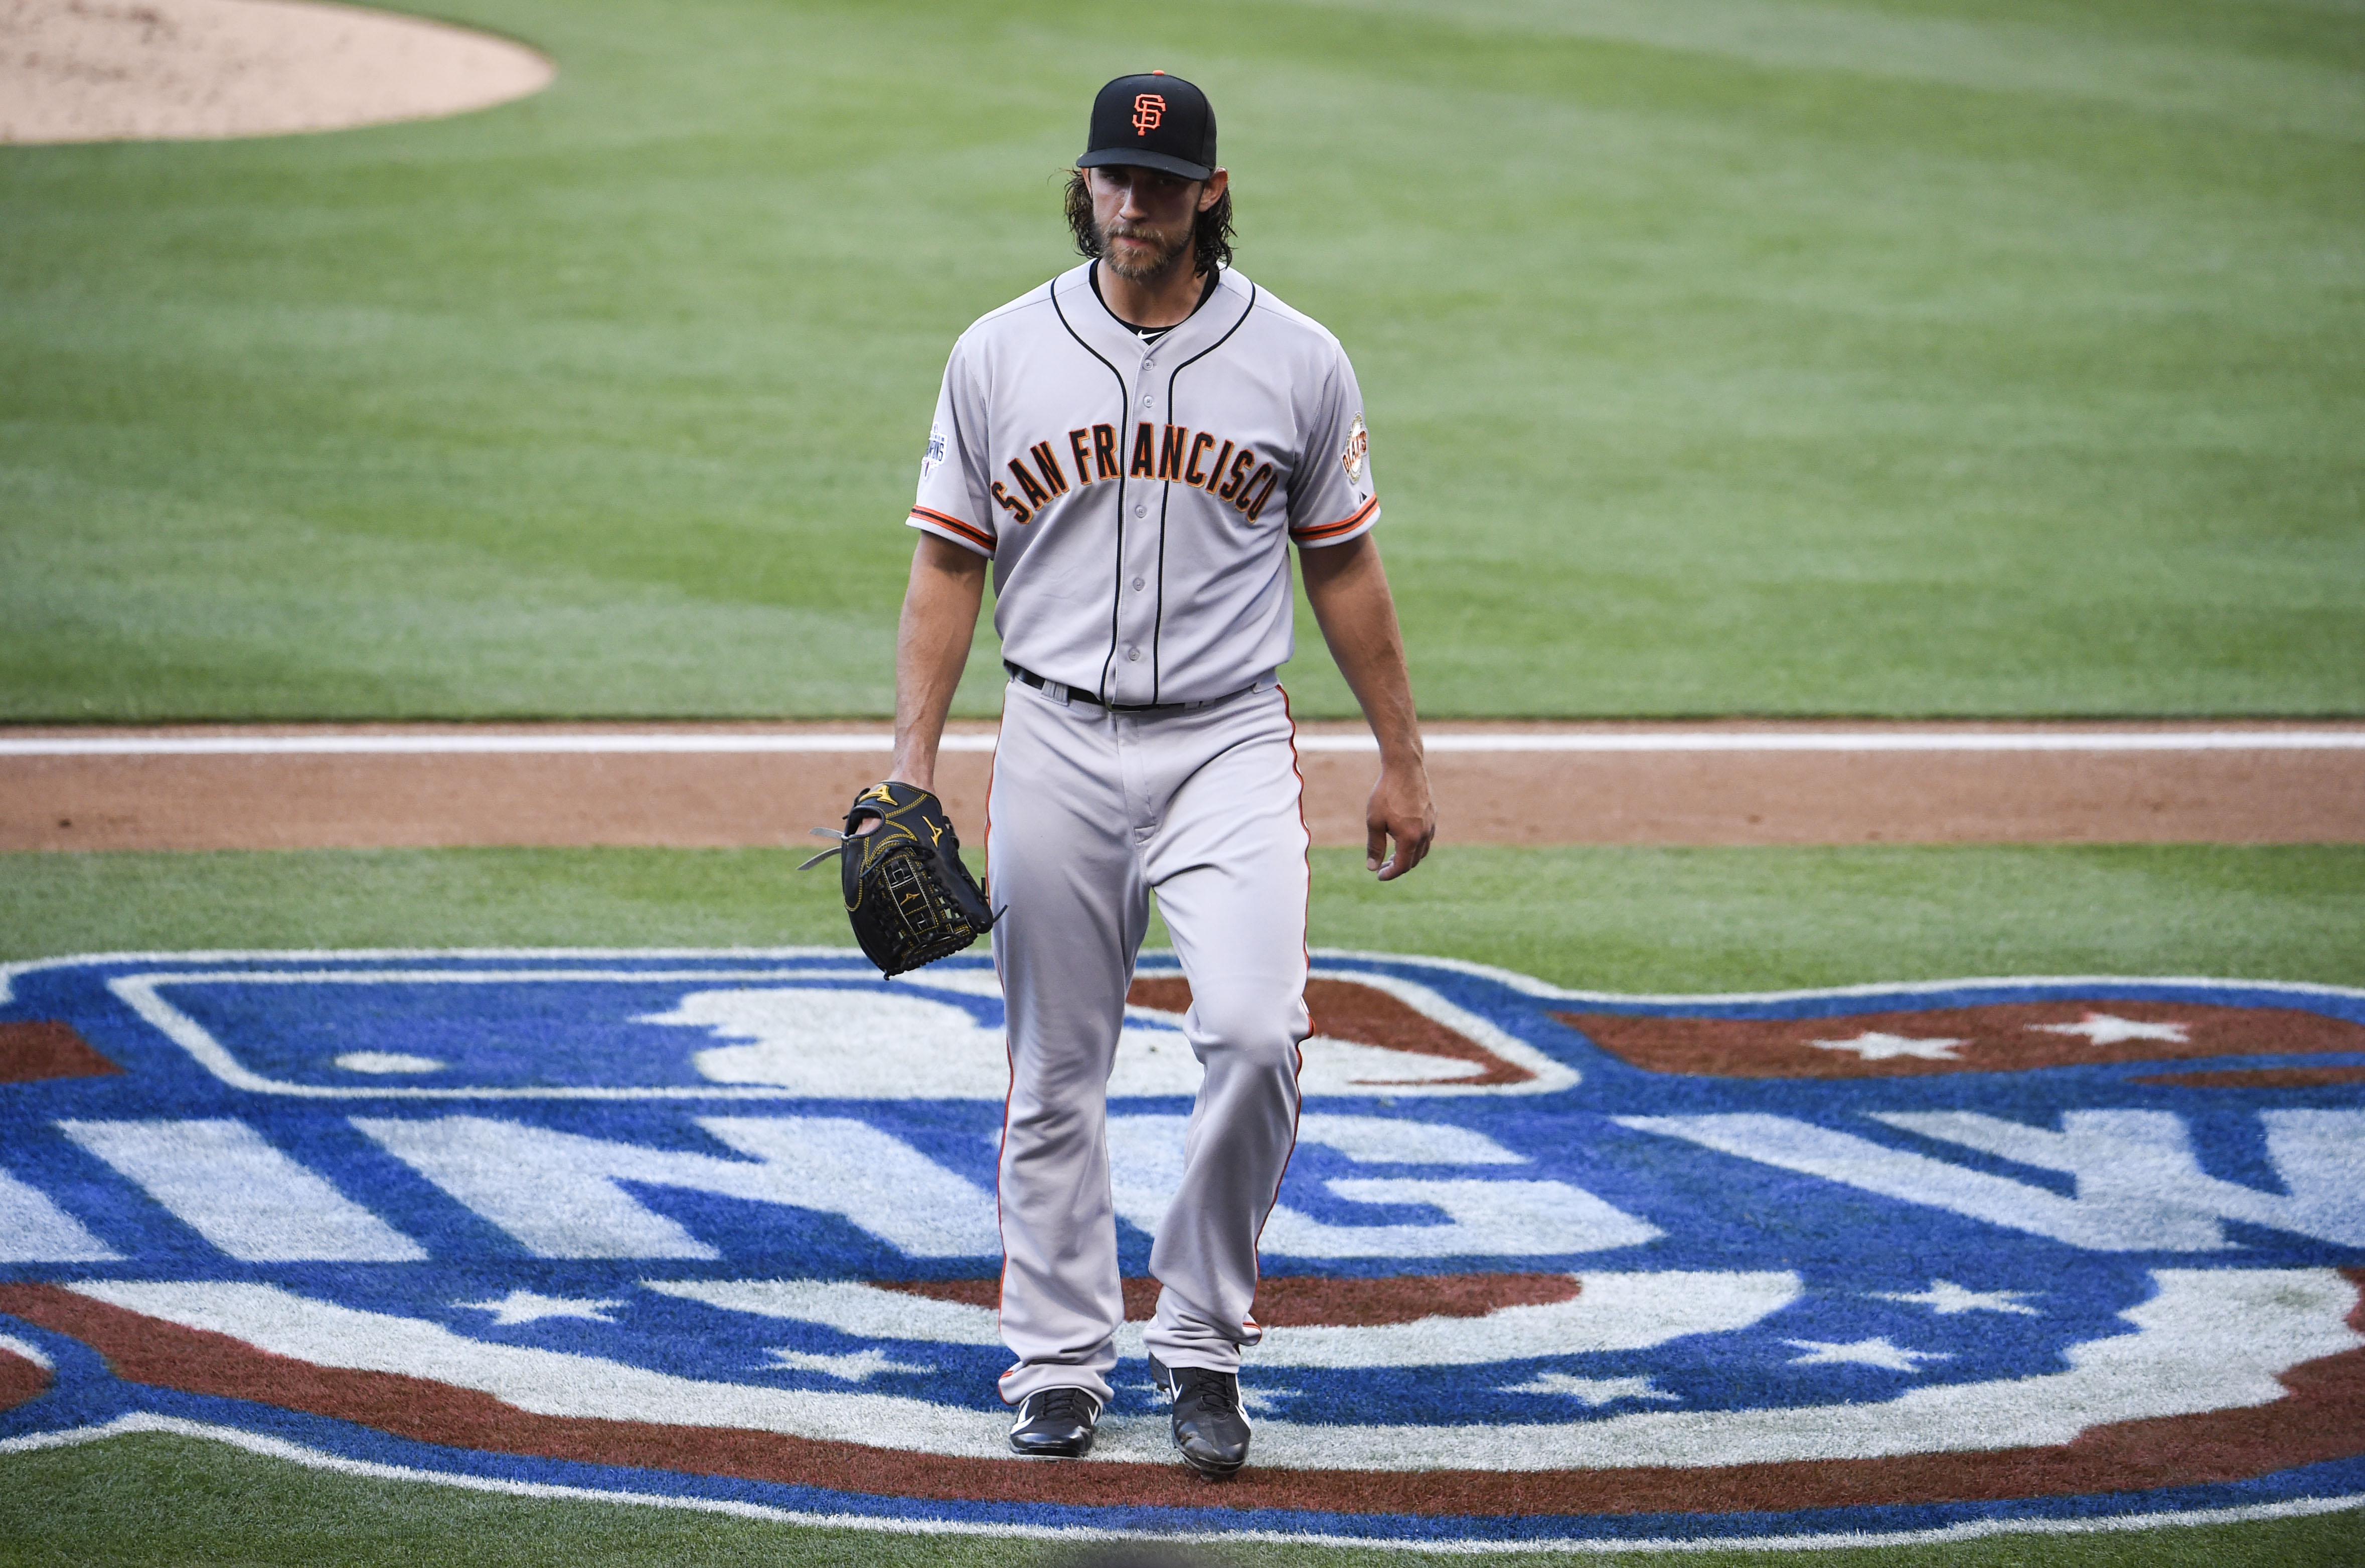 Madison Bumgarner is masterful as Giants win the World Series